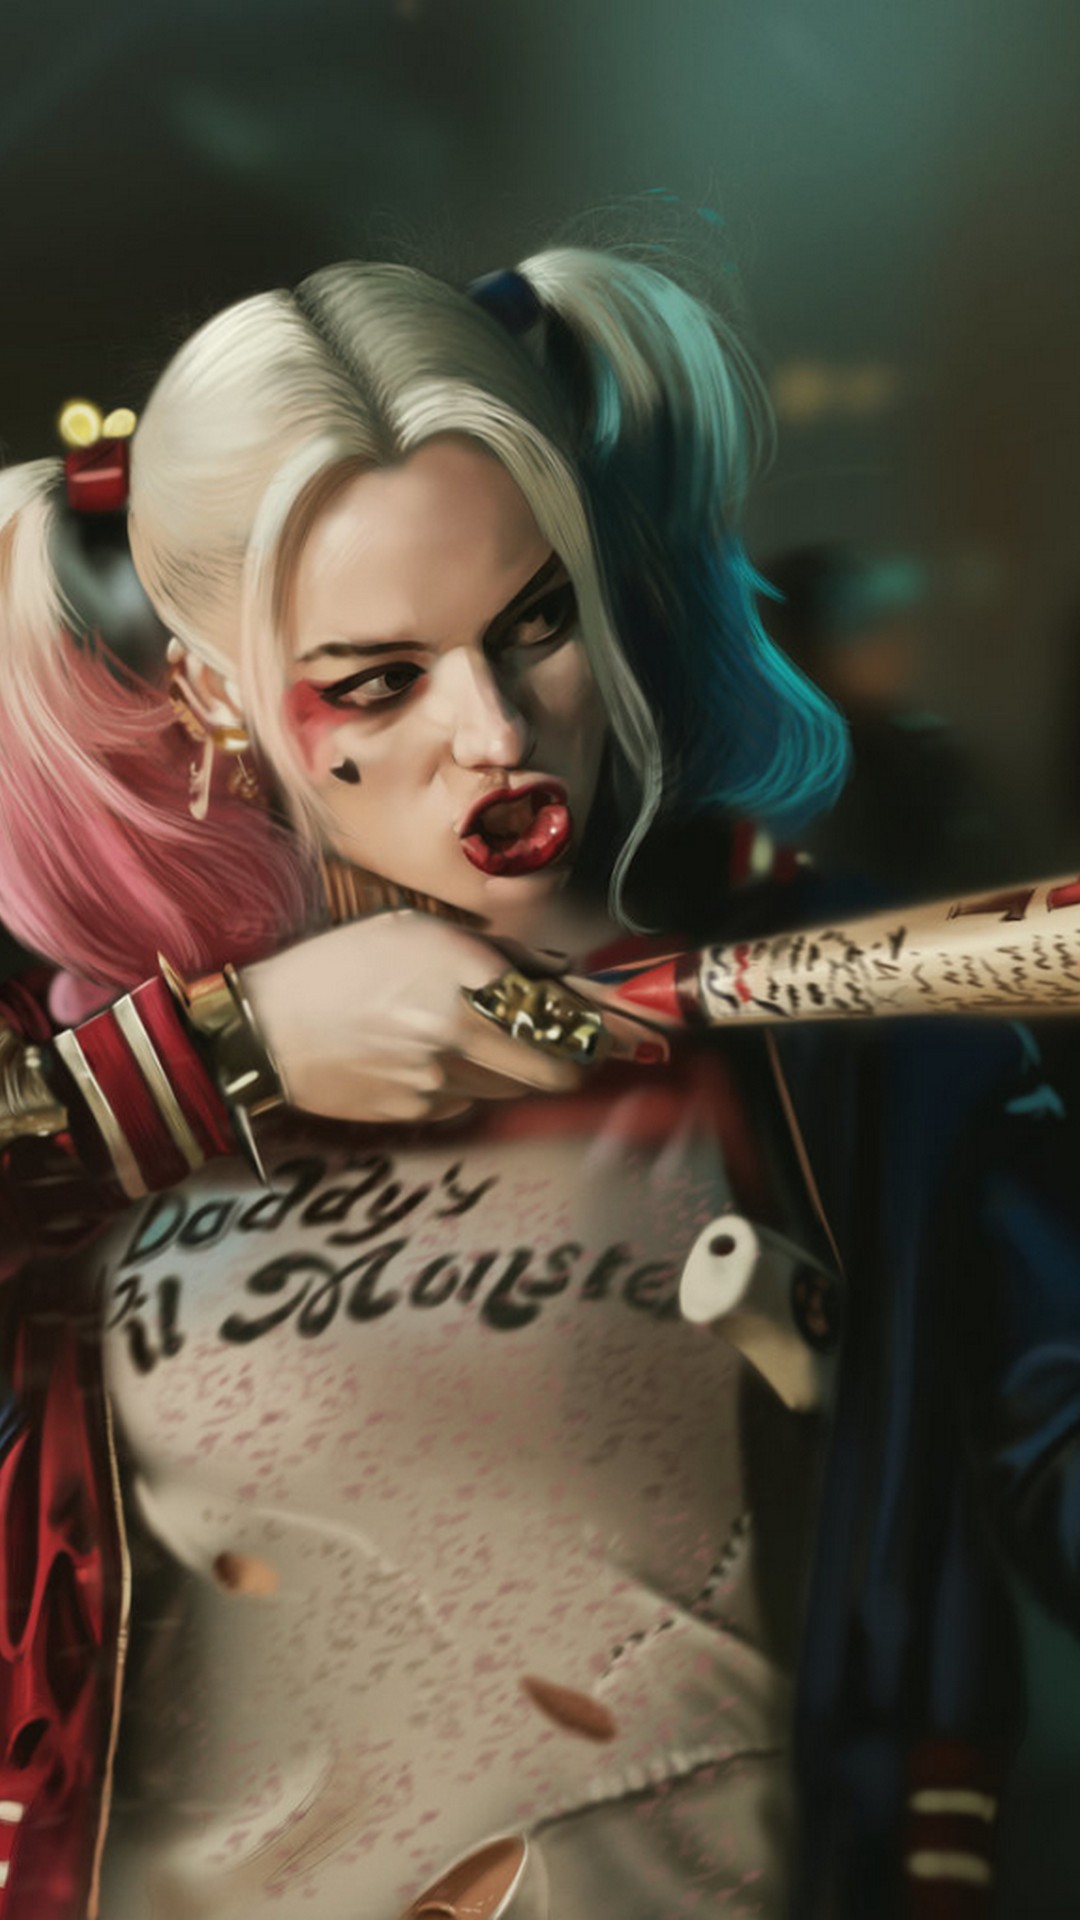 Wallpaper Harley Quinn Makeup iPhone with image resolution 1080x1920 pixel. You can make this wallpaper for your iPhone 5, 6, 7, 8, X backgrounds, Mobile Screensaver, or iPad Lock Screen